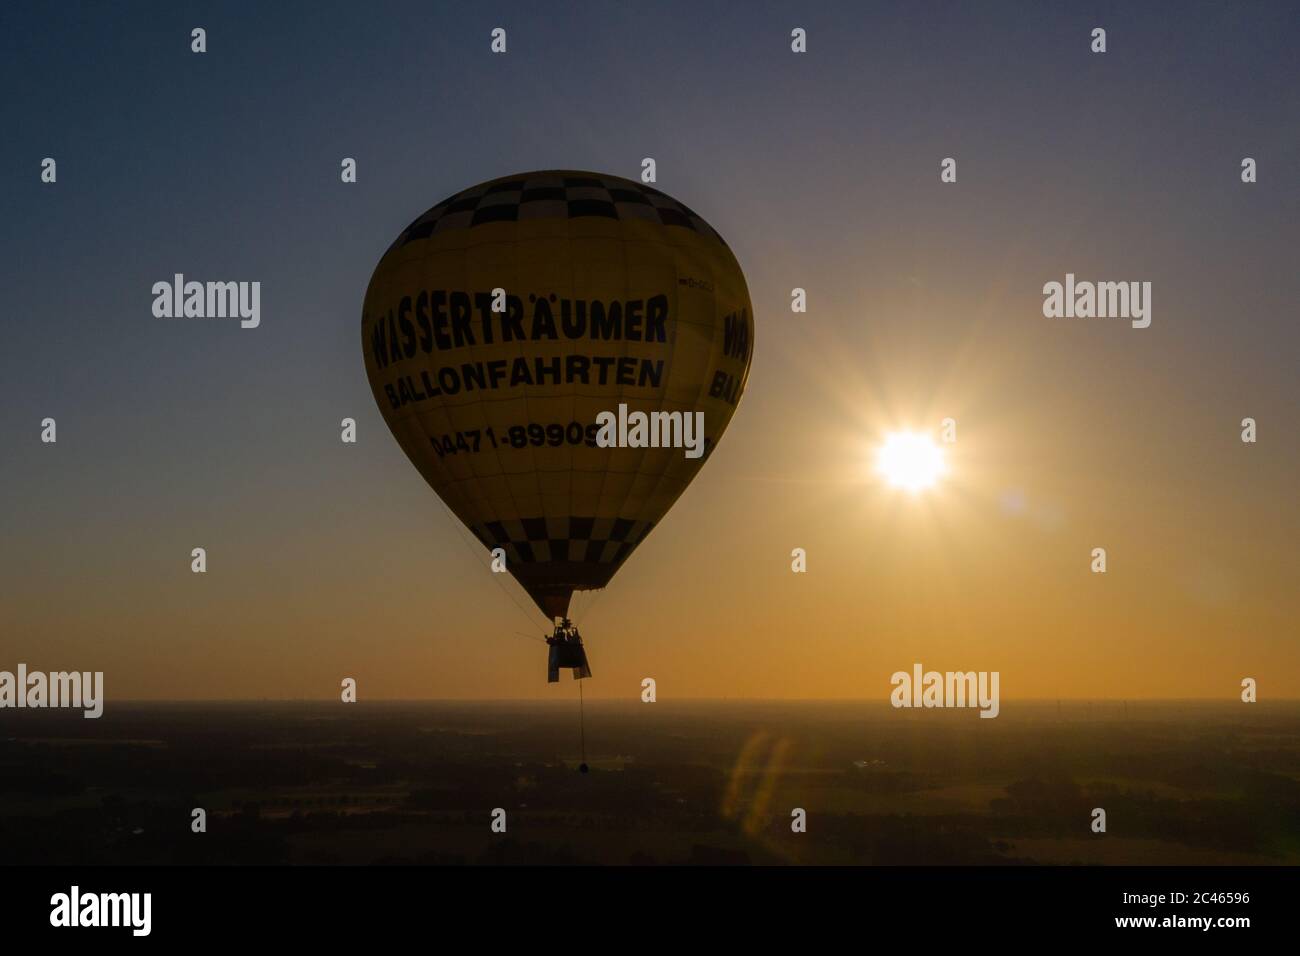 Cloppenburg, Germany. 23rd June, 2020. The band 'Crackerjacks' rides in a hot air balloon over Cloppenburg before the setting sun and gives a balloon concert (recorded with a drone). Credit: Mohssen Assanimoghaddam/dpa/Alamy Live News Stock Photo